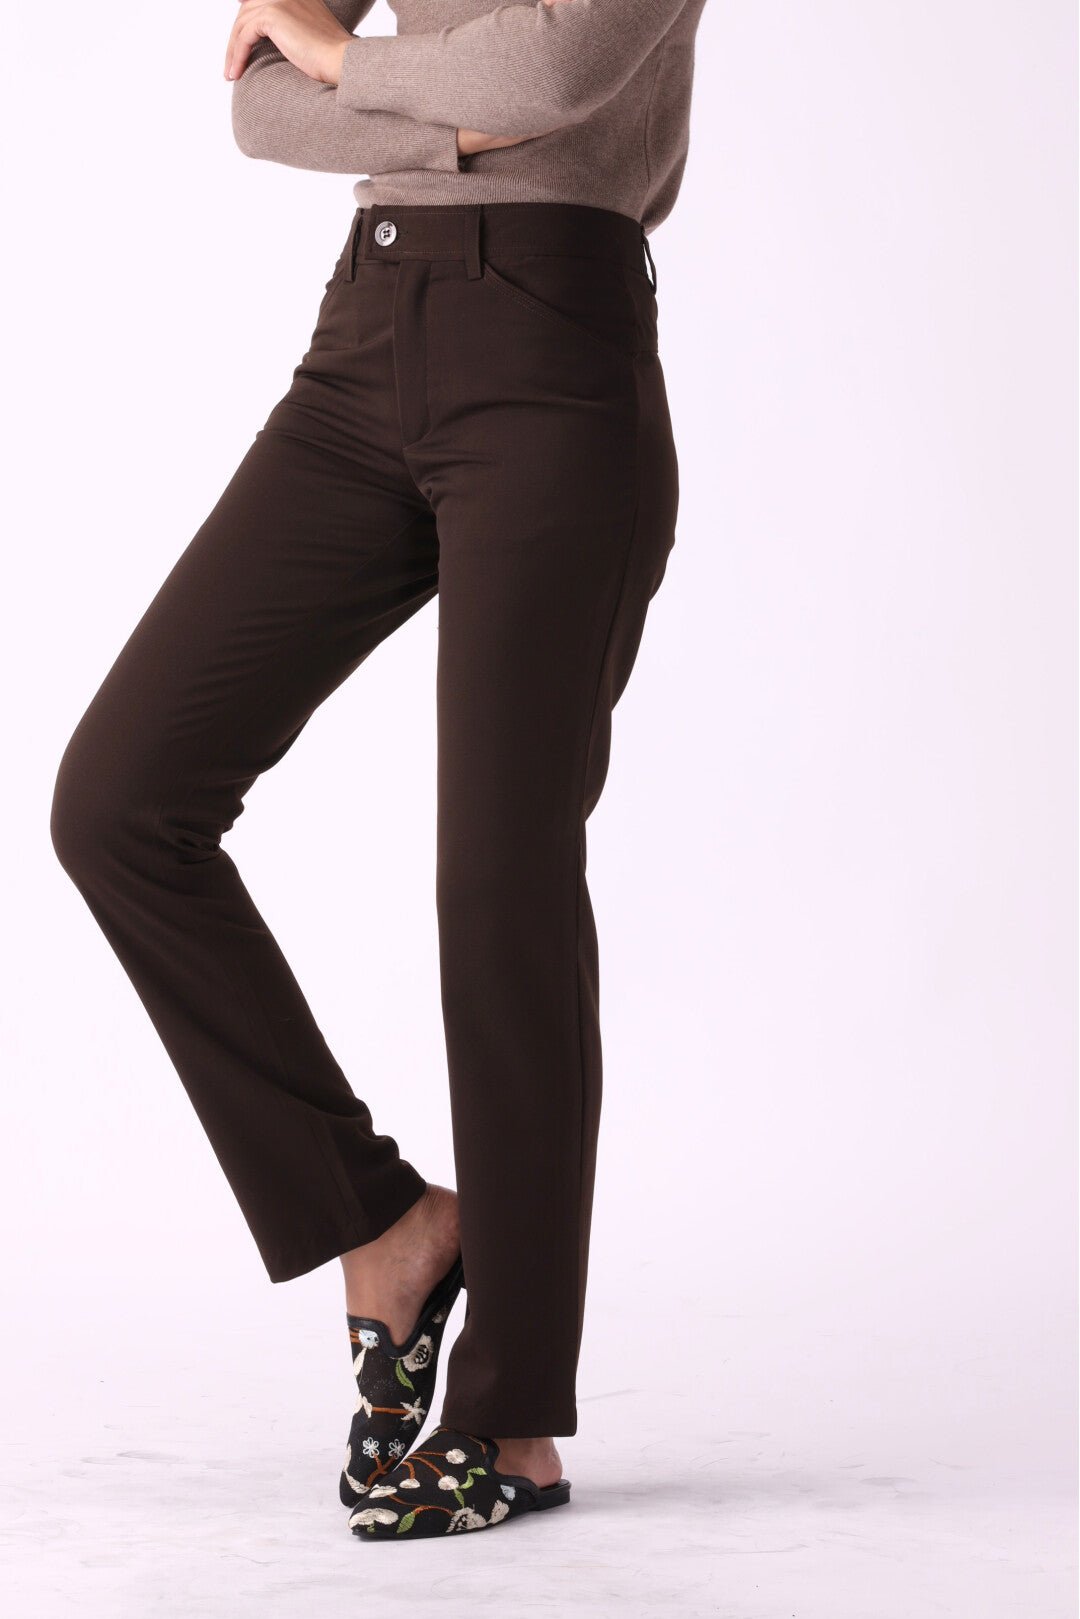 Solid Buttoned Straight Fit Pants - Negative Apparel